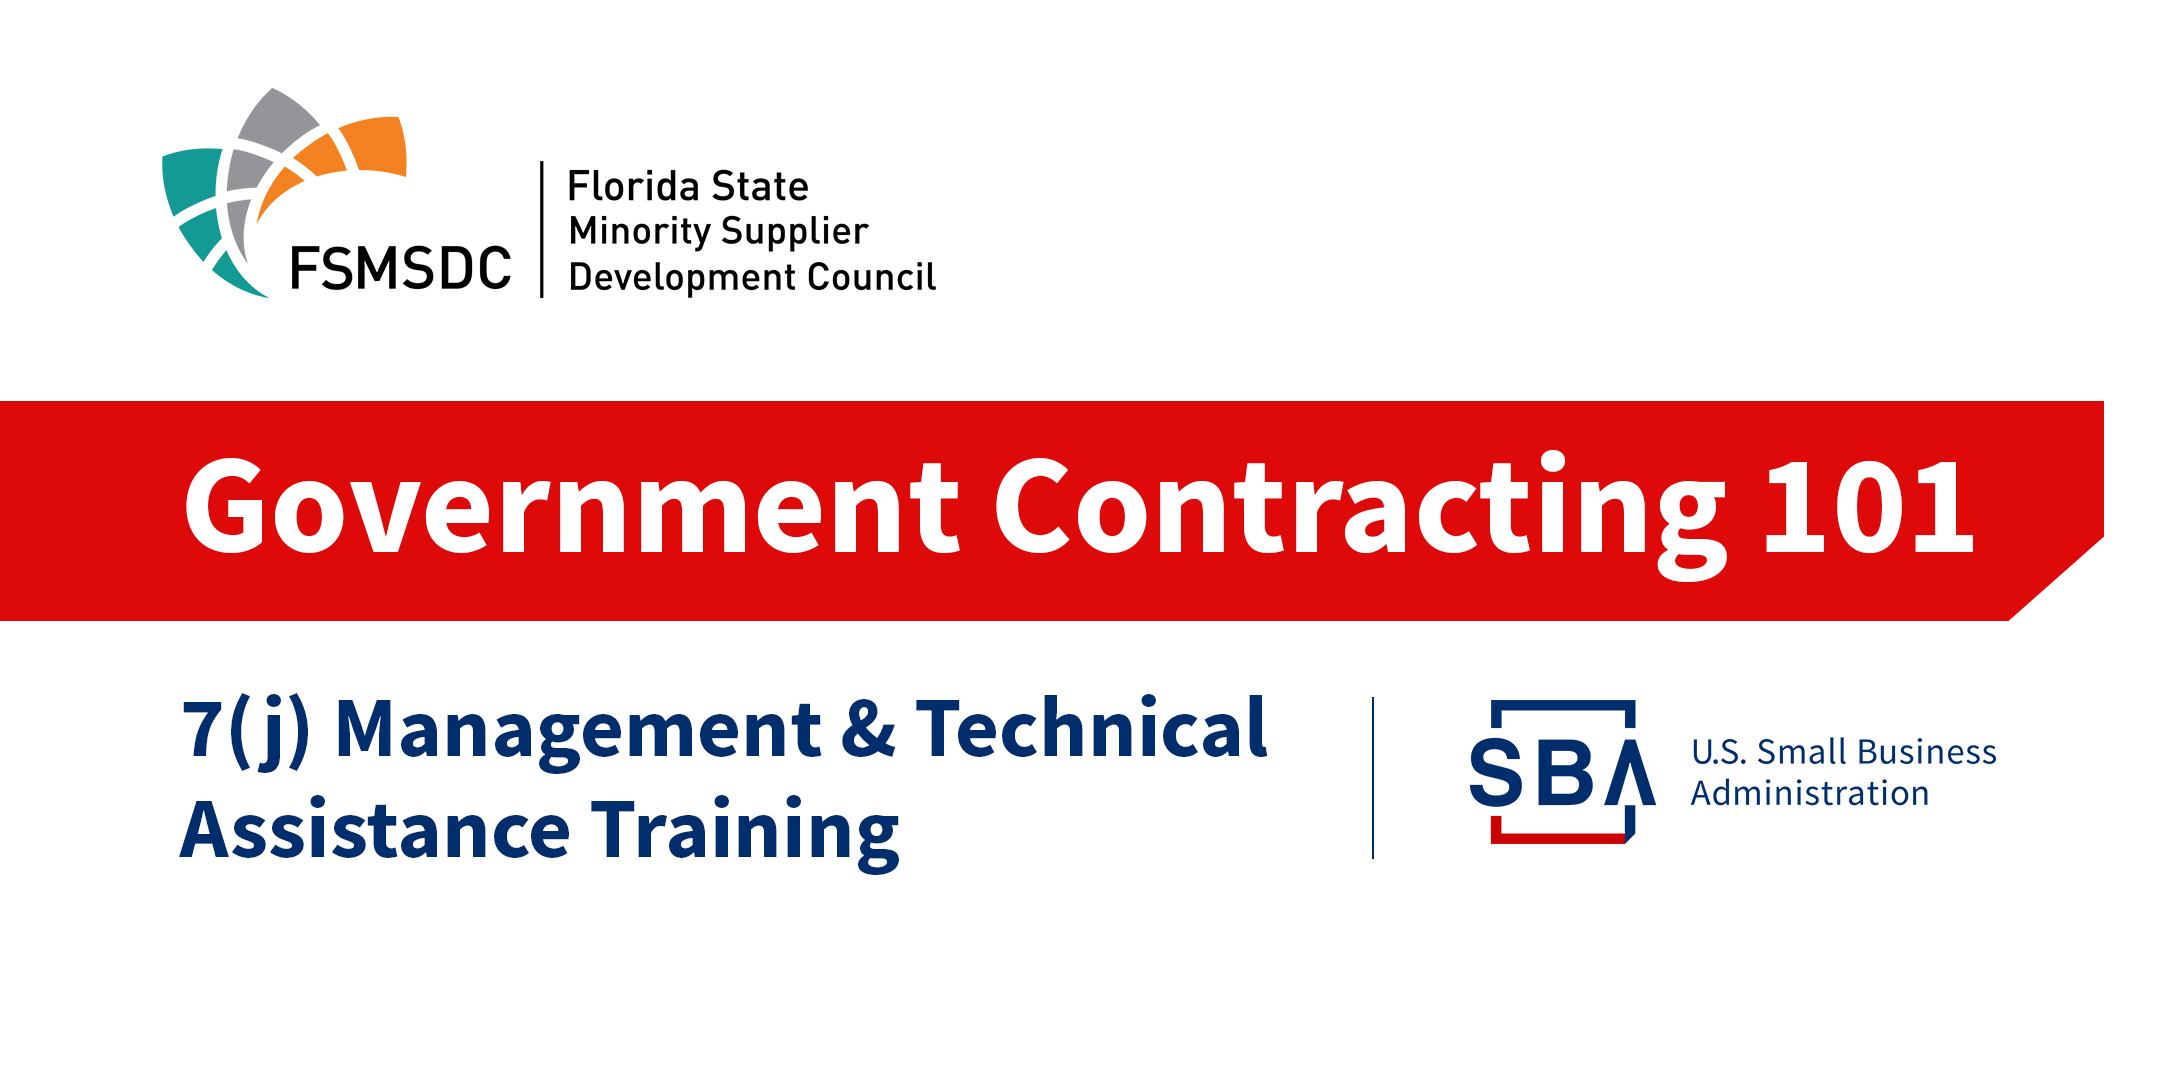 Government Contracting 101